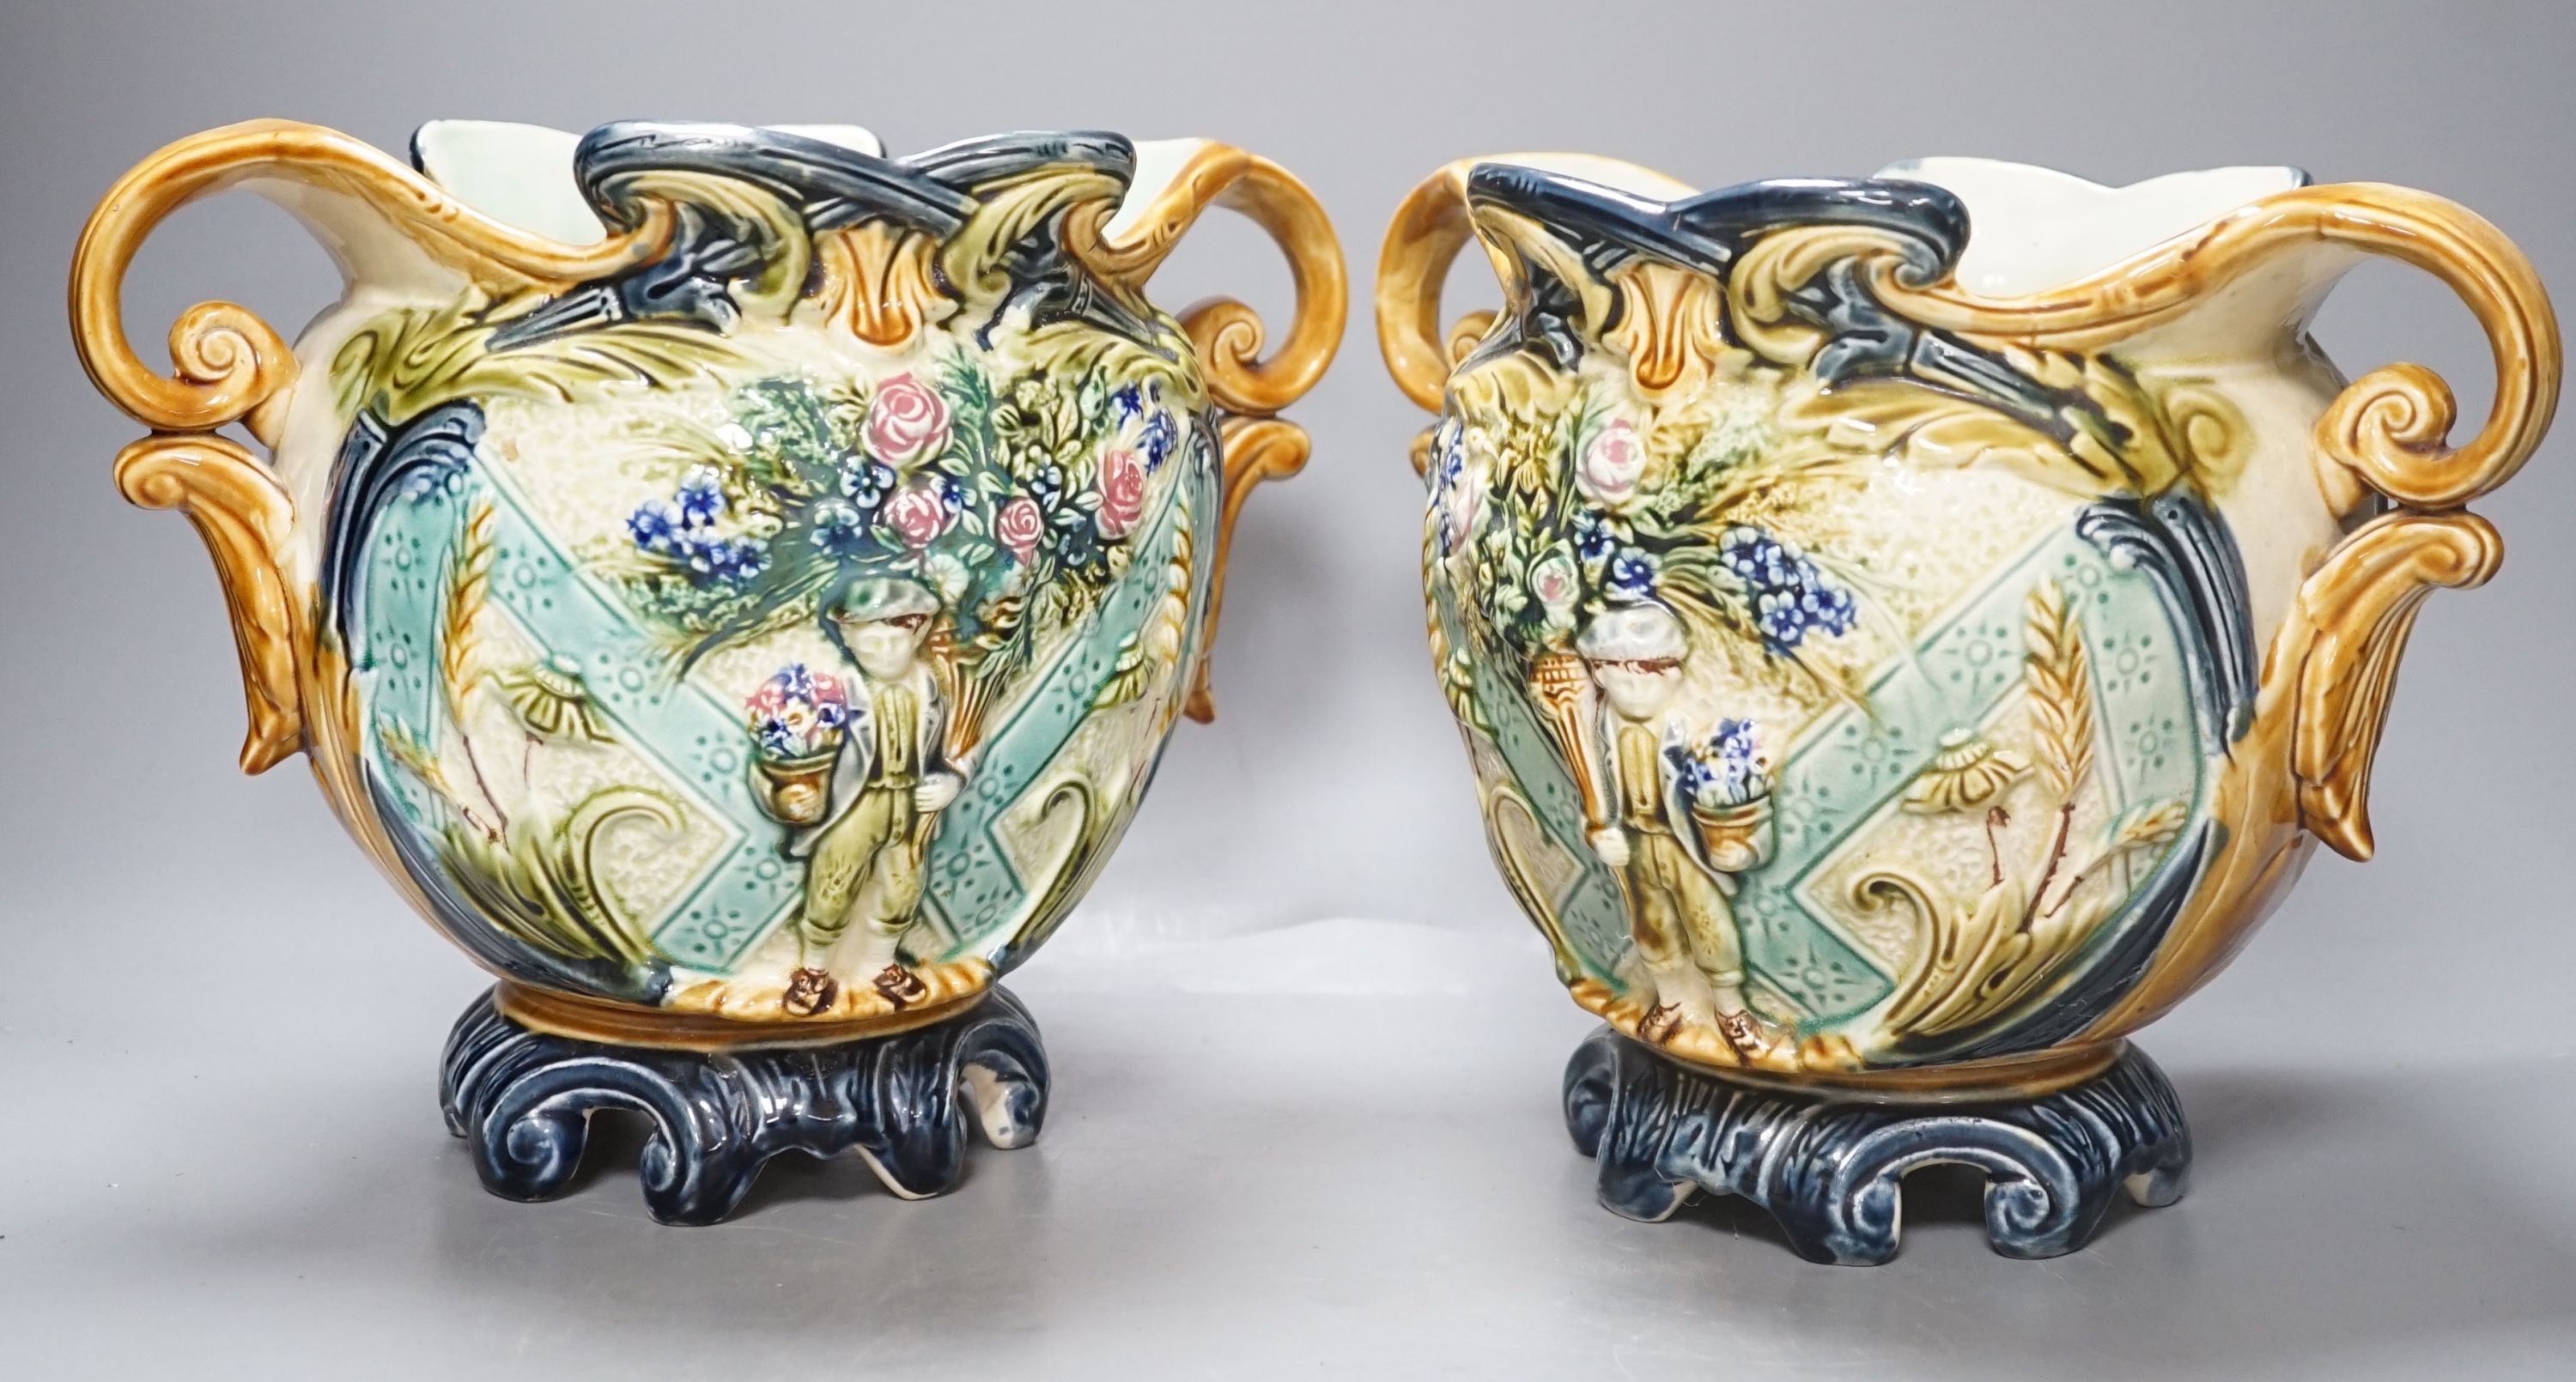 A pair of Continental Majolica jardinieres - 22cm tall